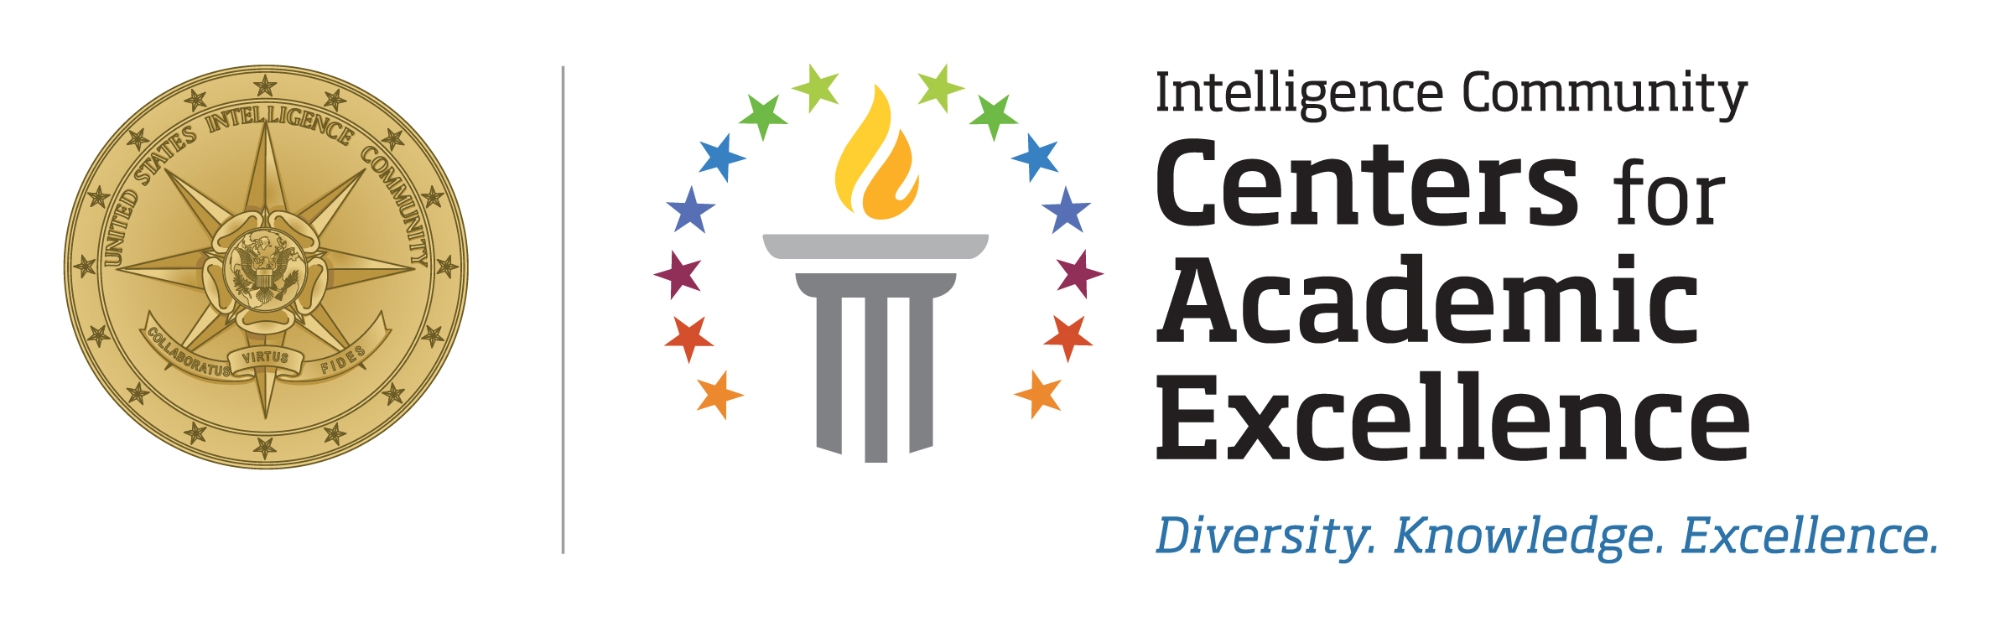 Intelligence Community centers for academic excellence Diversity knowledge excellence